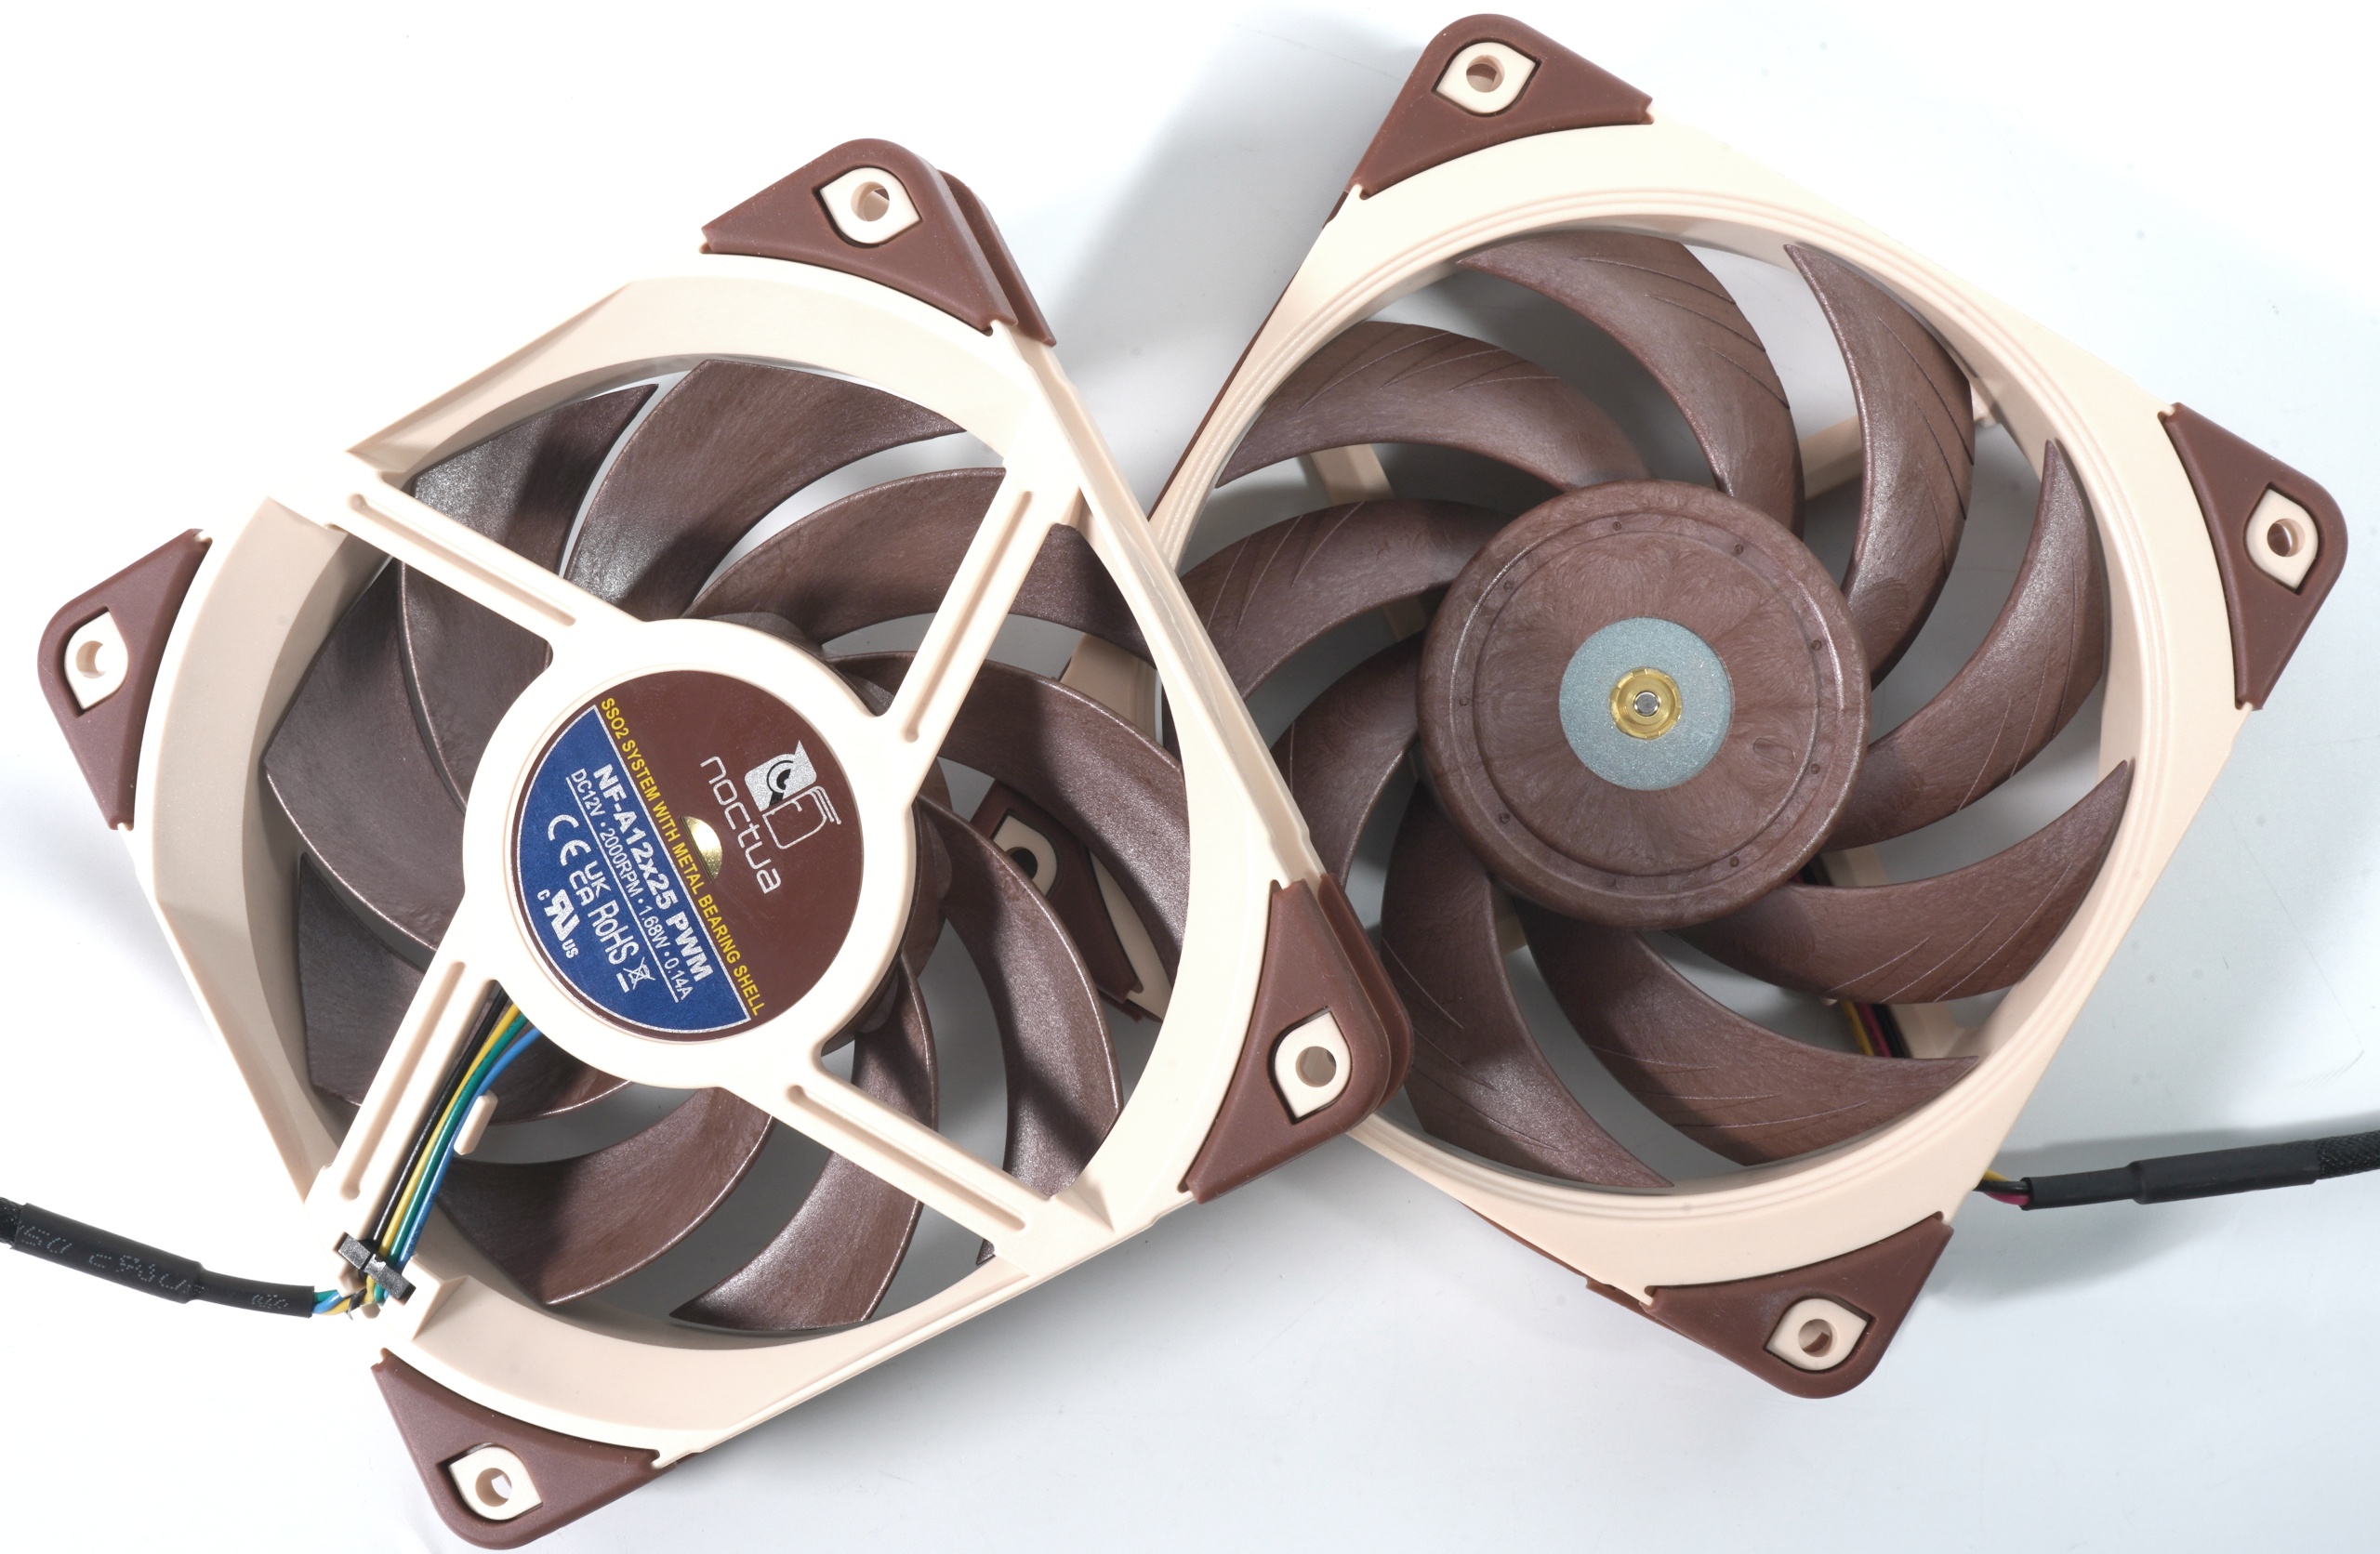 Different Noctua NF-A12x25 PWM Case Fans in Review - When database tests, user experience and re-tests differ from each other